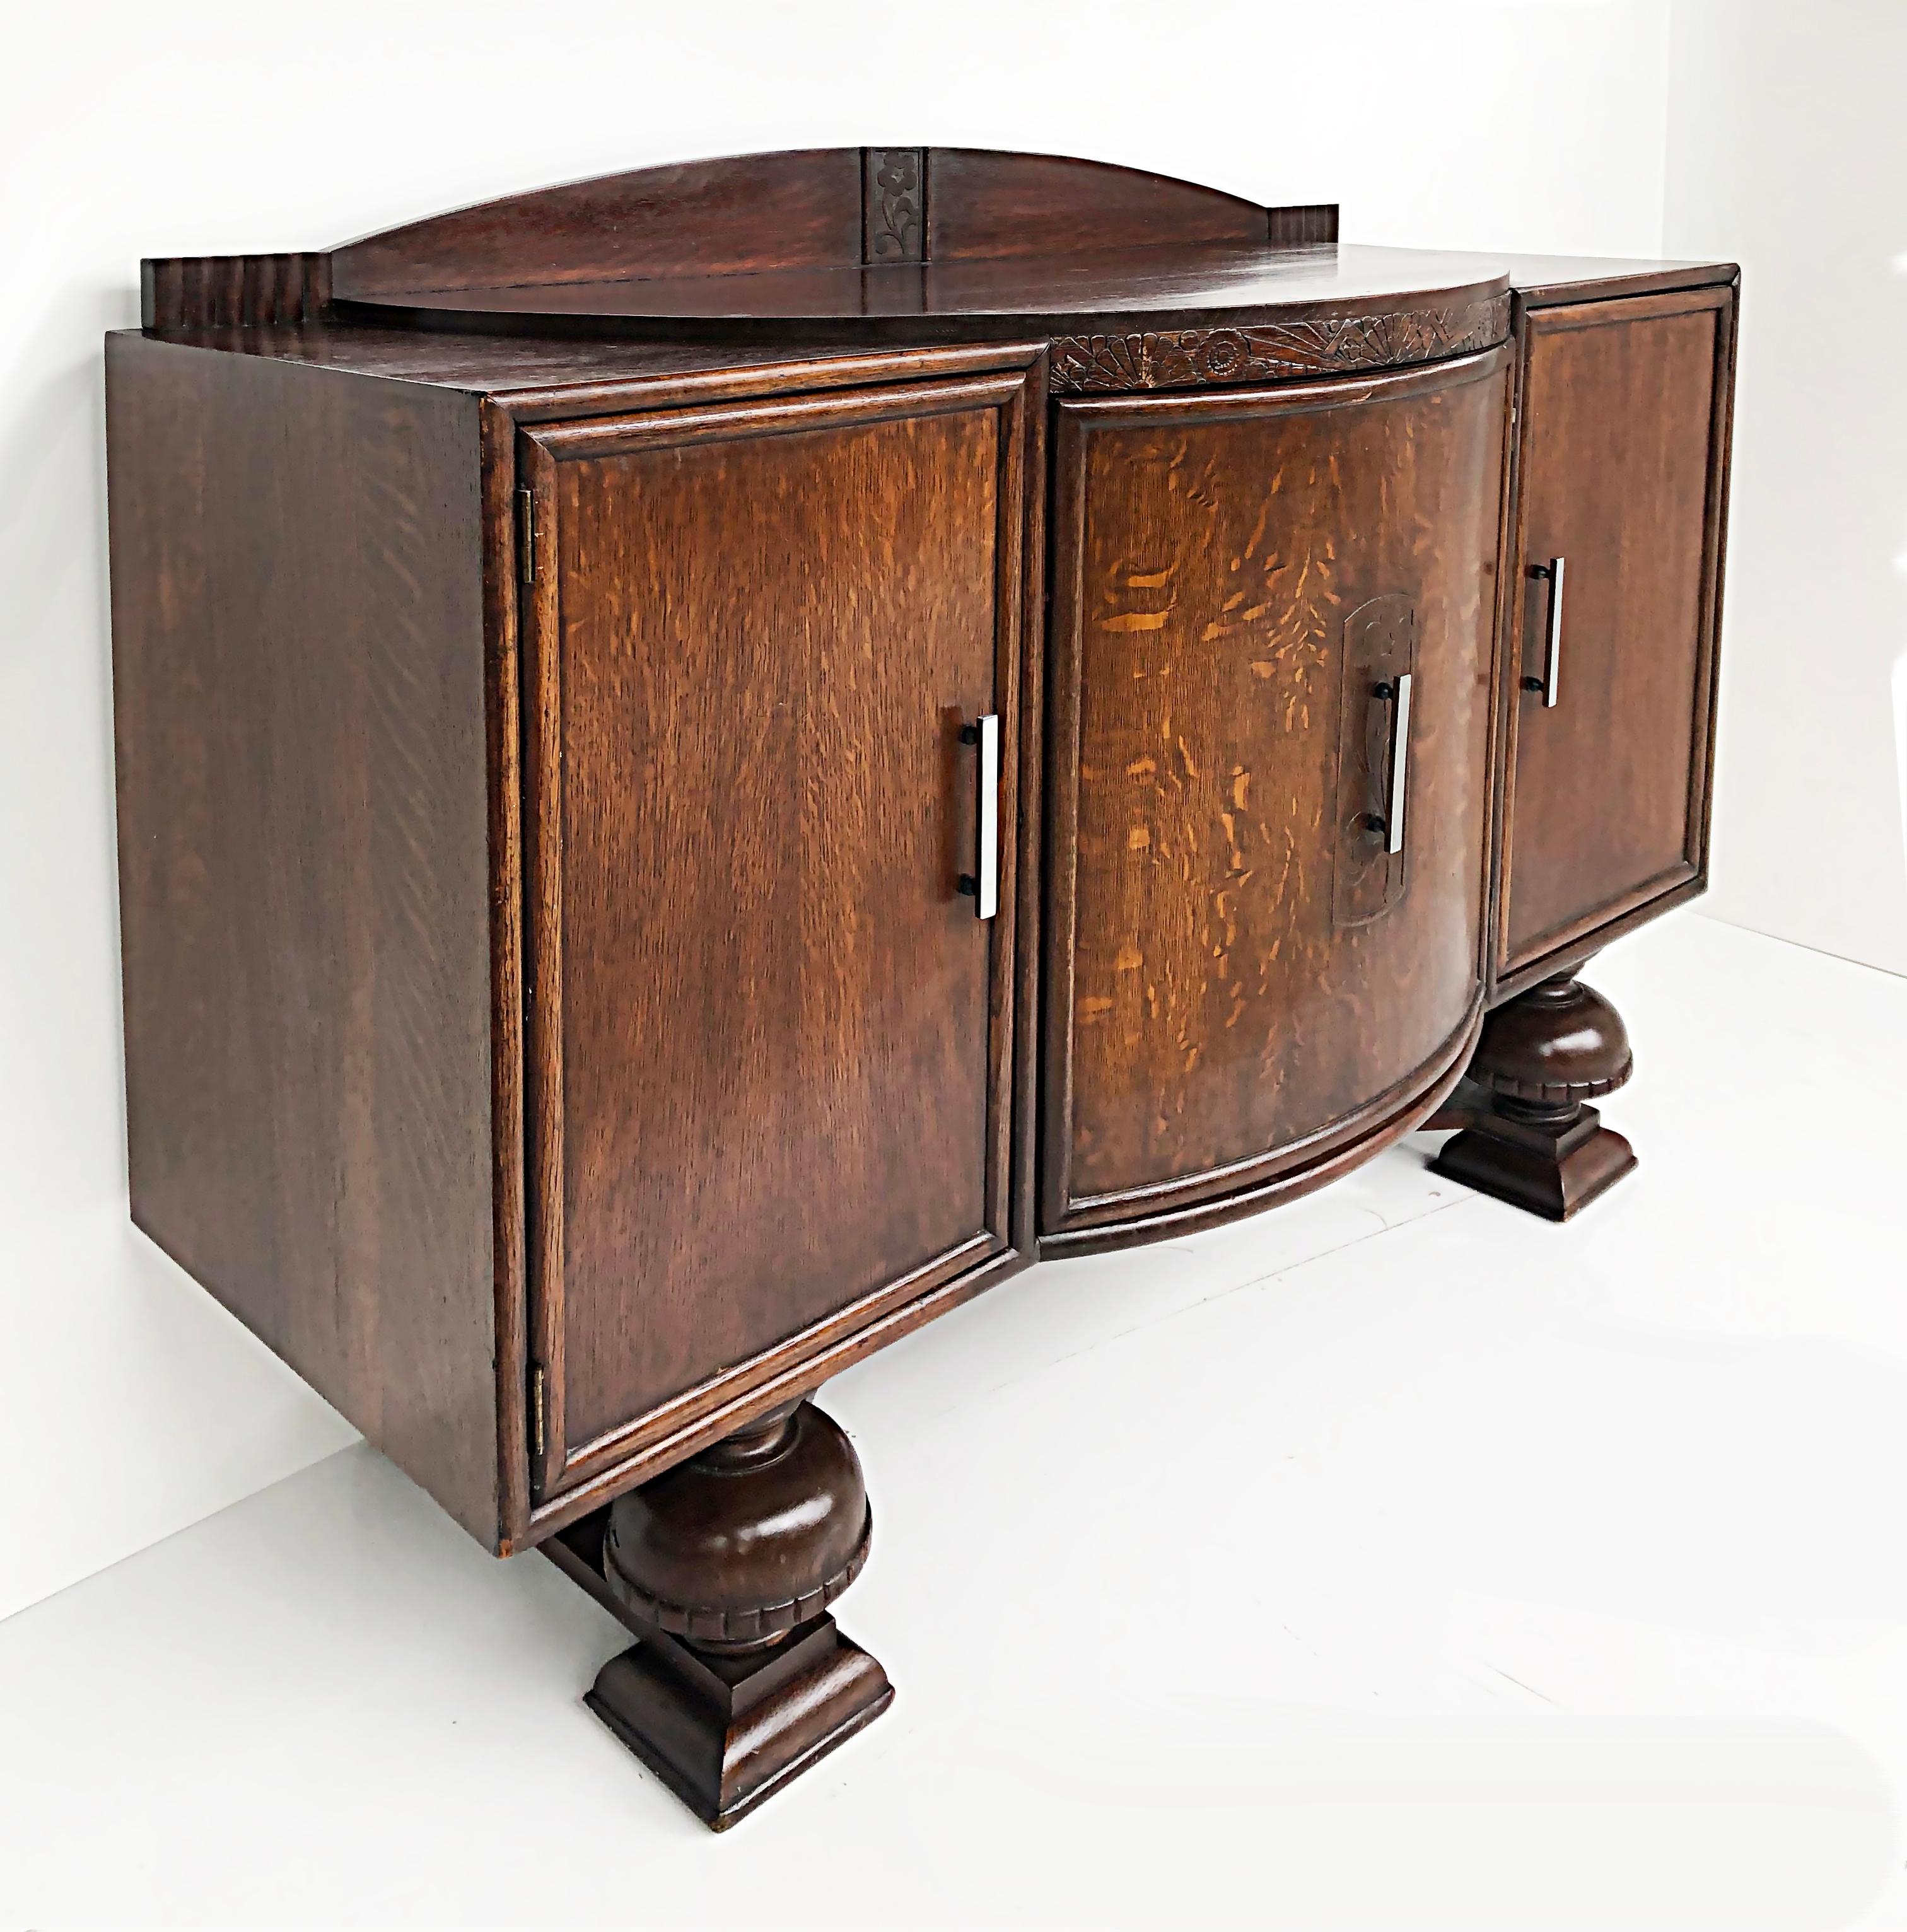 English Deco Oak Dry Bar Server, C.W.S. LTD. Cabinet Factory Birmingham

Offered for sale is a substantial 1940s English Deco oak cabinet intended as a dry bar cabinet. The piece is marked C.W.S. LTD Birmingham (England). The cabinet has 3 large